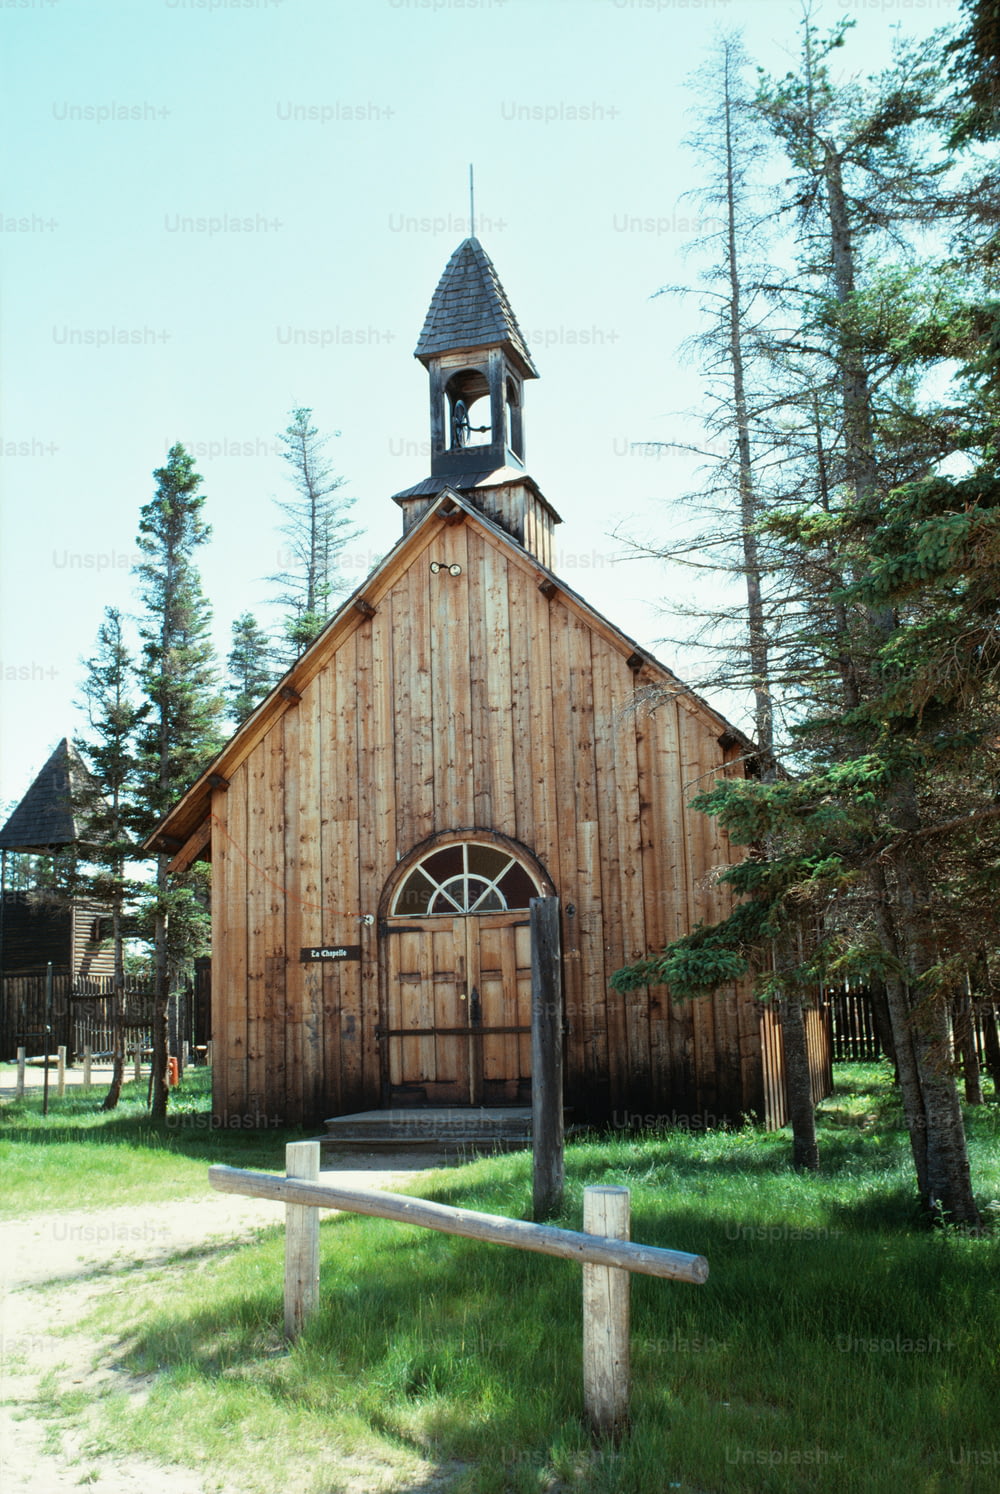 a wooden church with a steeple and a clock tower